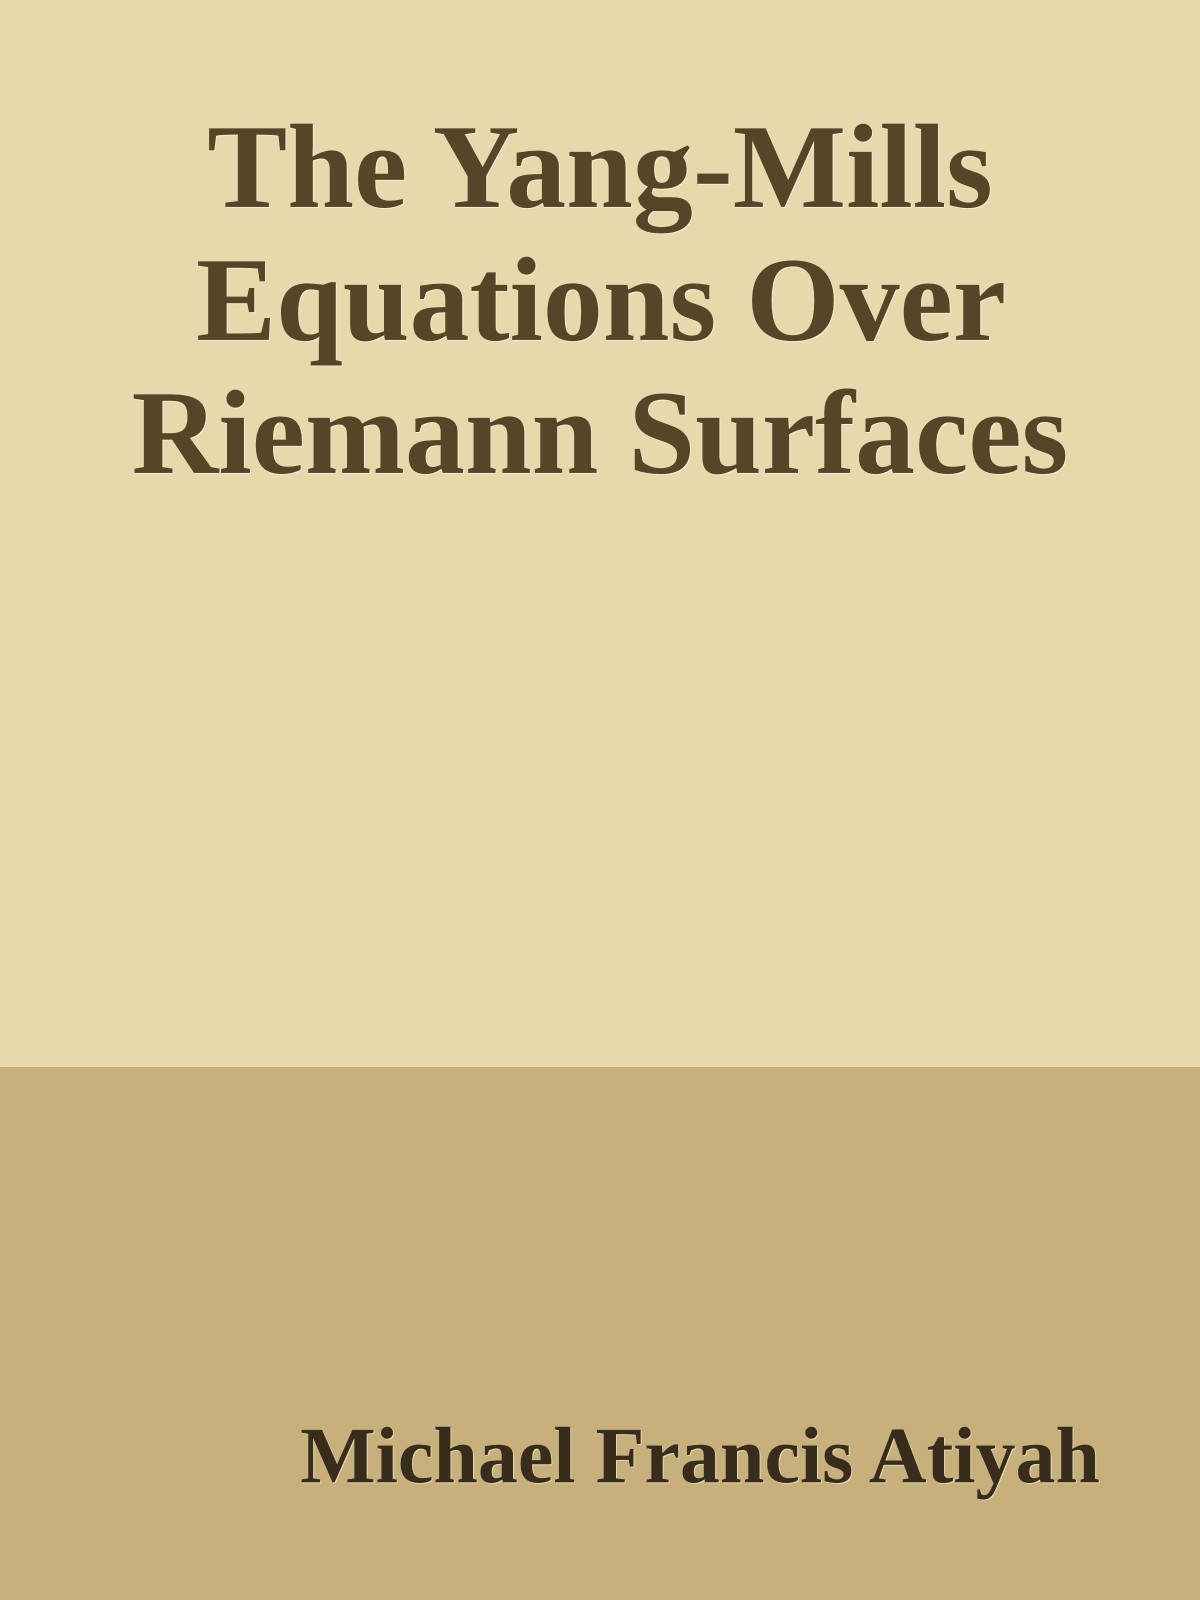 The Yang-Mills Equations Over Riemann Surfaces